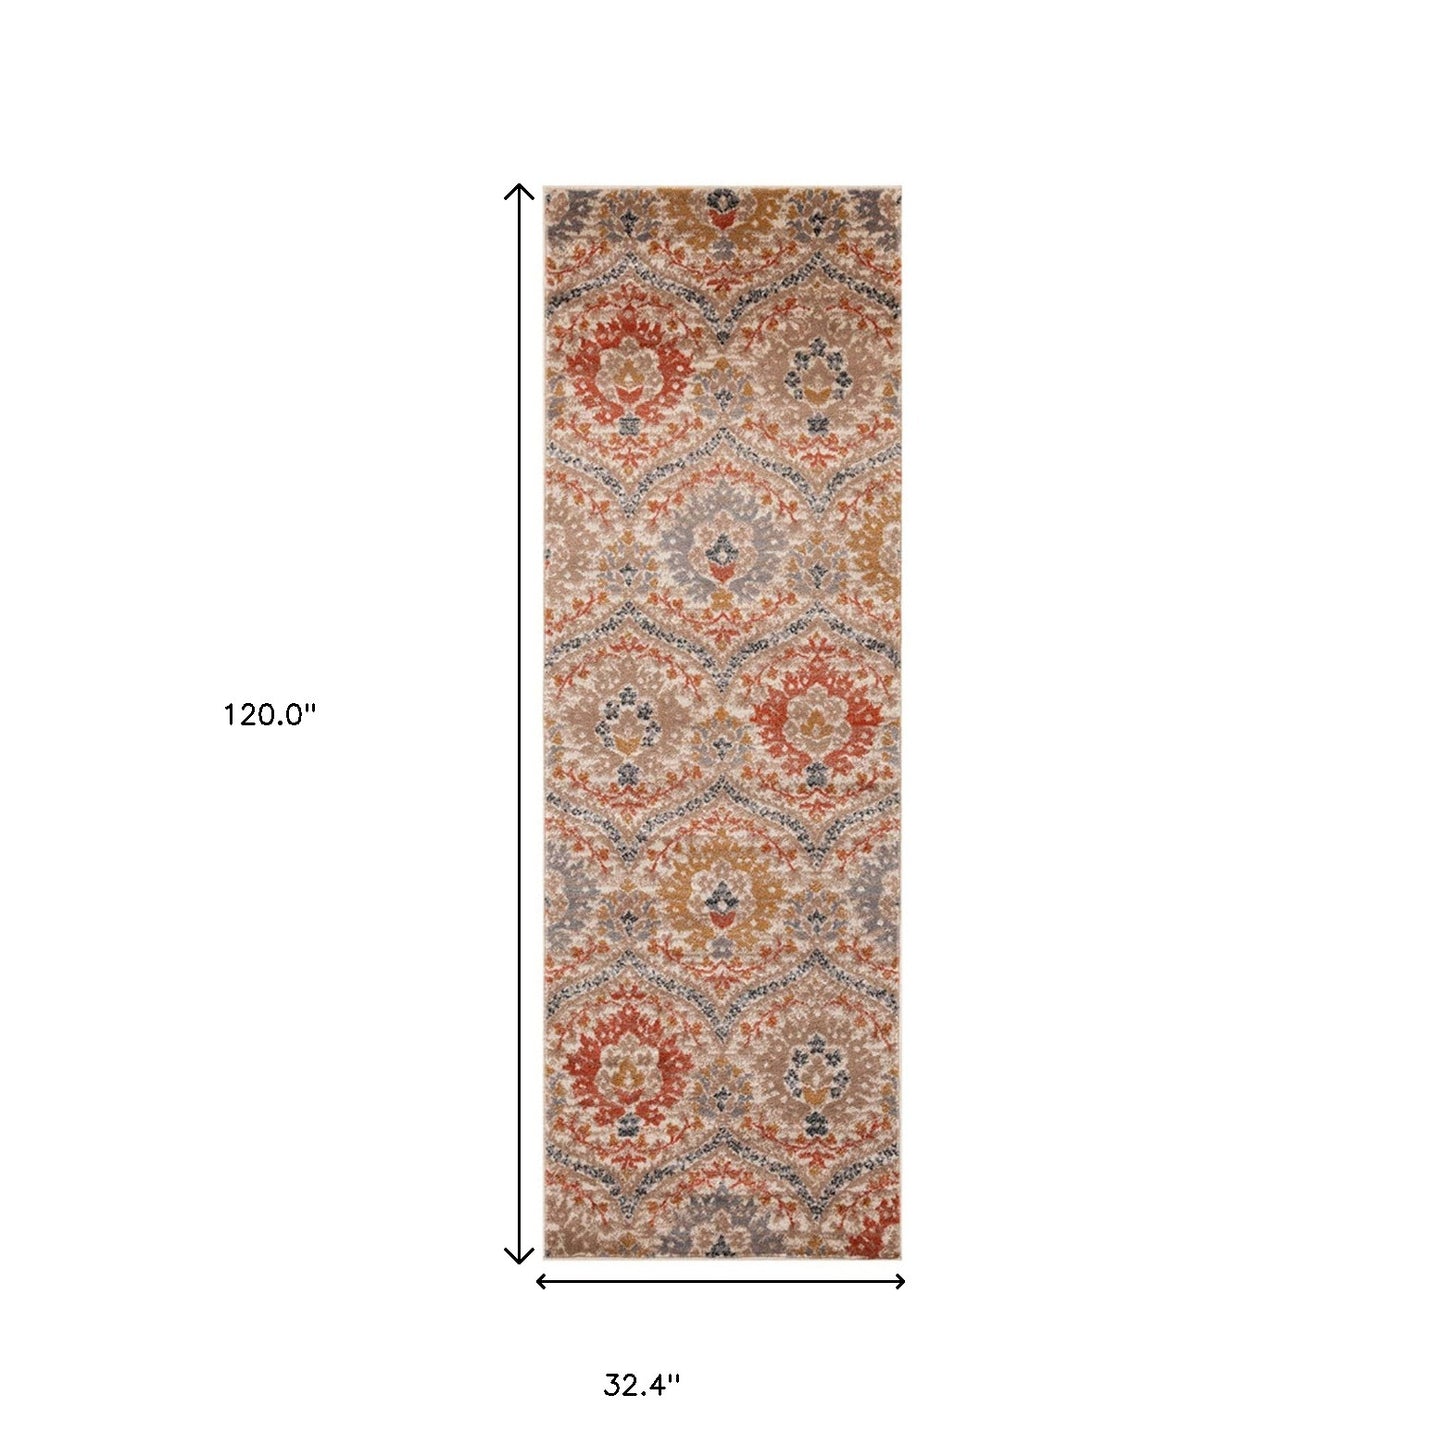 10' Ivory Orange And Gray Floral Stain Resistant Runner Rug